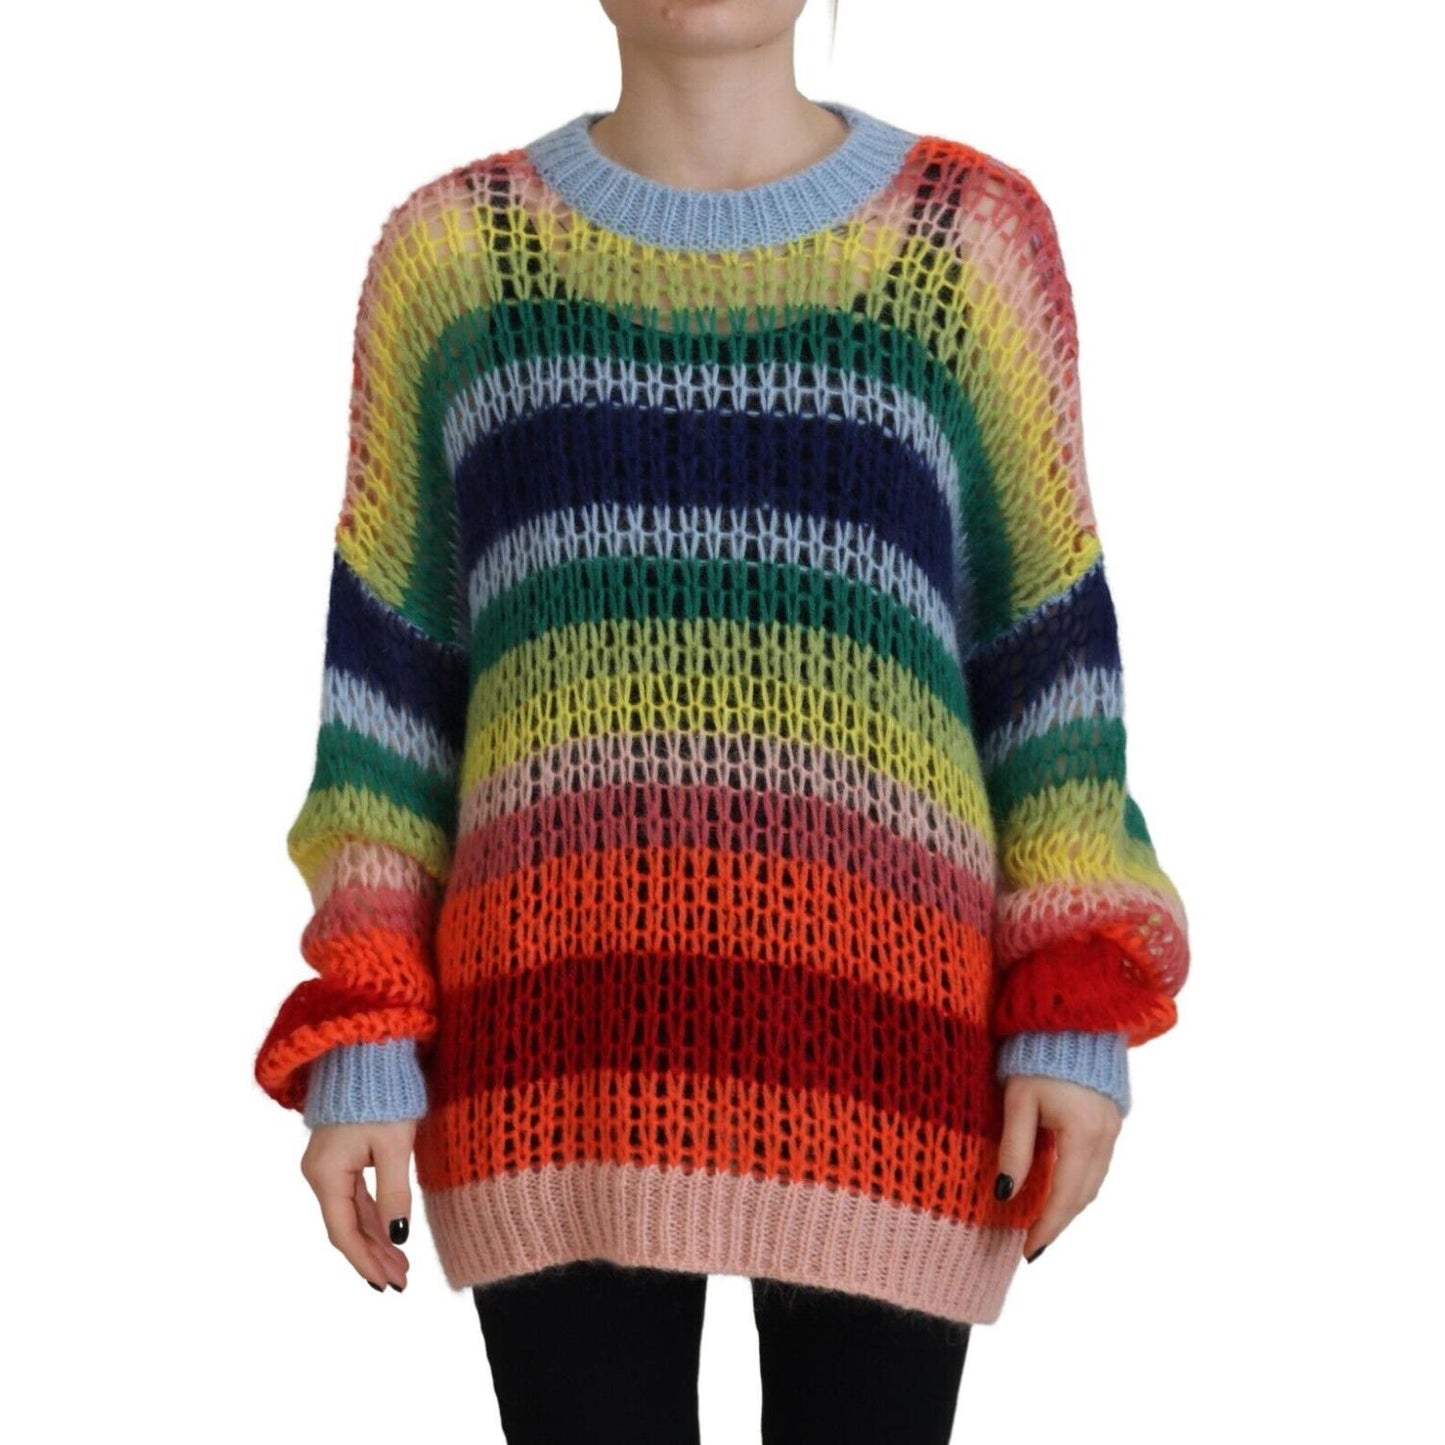 Dsquared²Multicolor Knitted Mohair Crewneck Pullover SweaterMcRichard Designer Brands£349.00